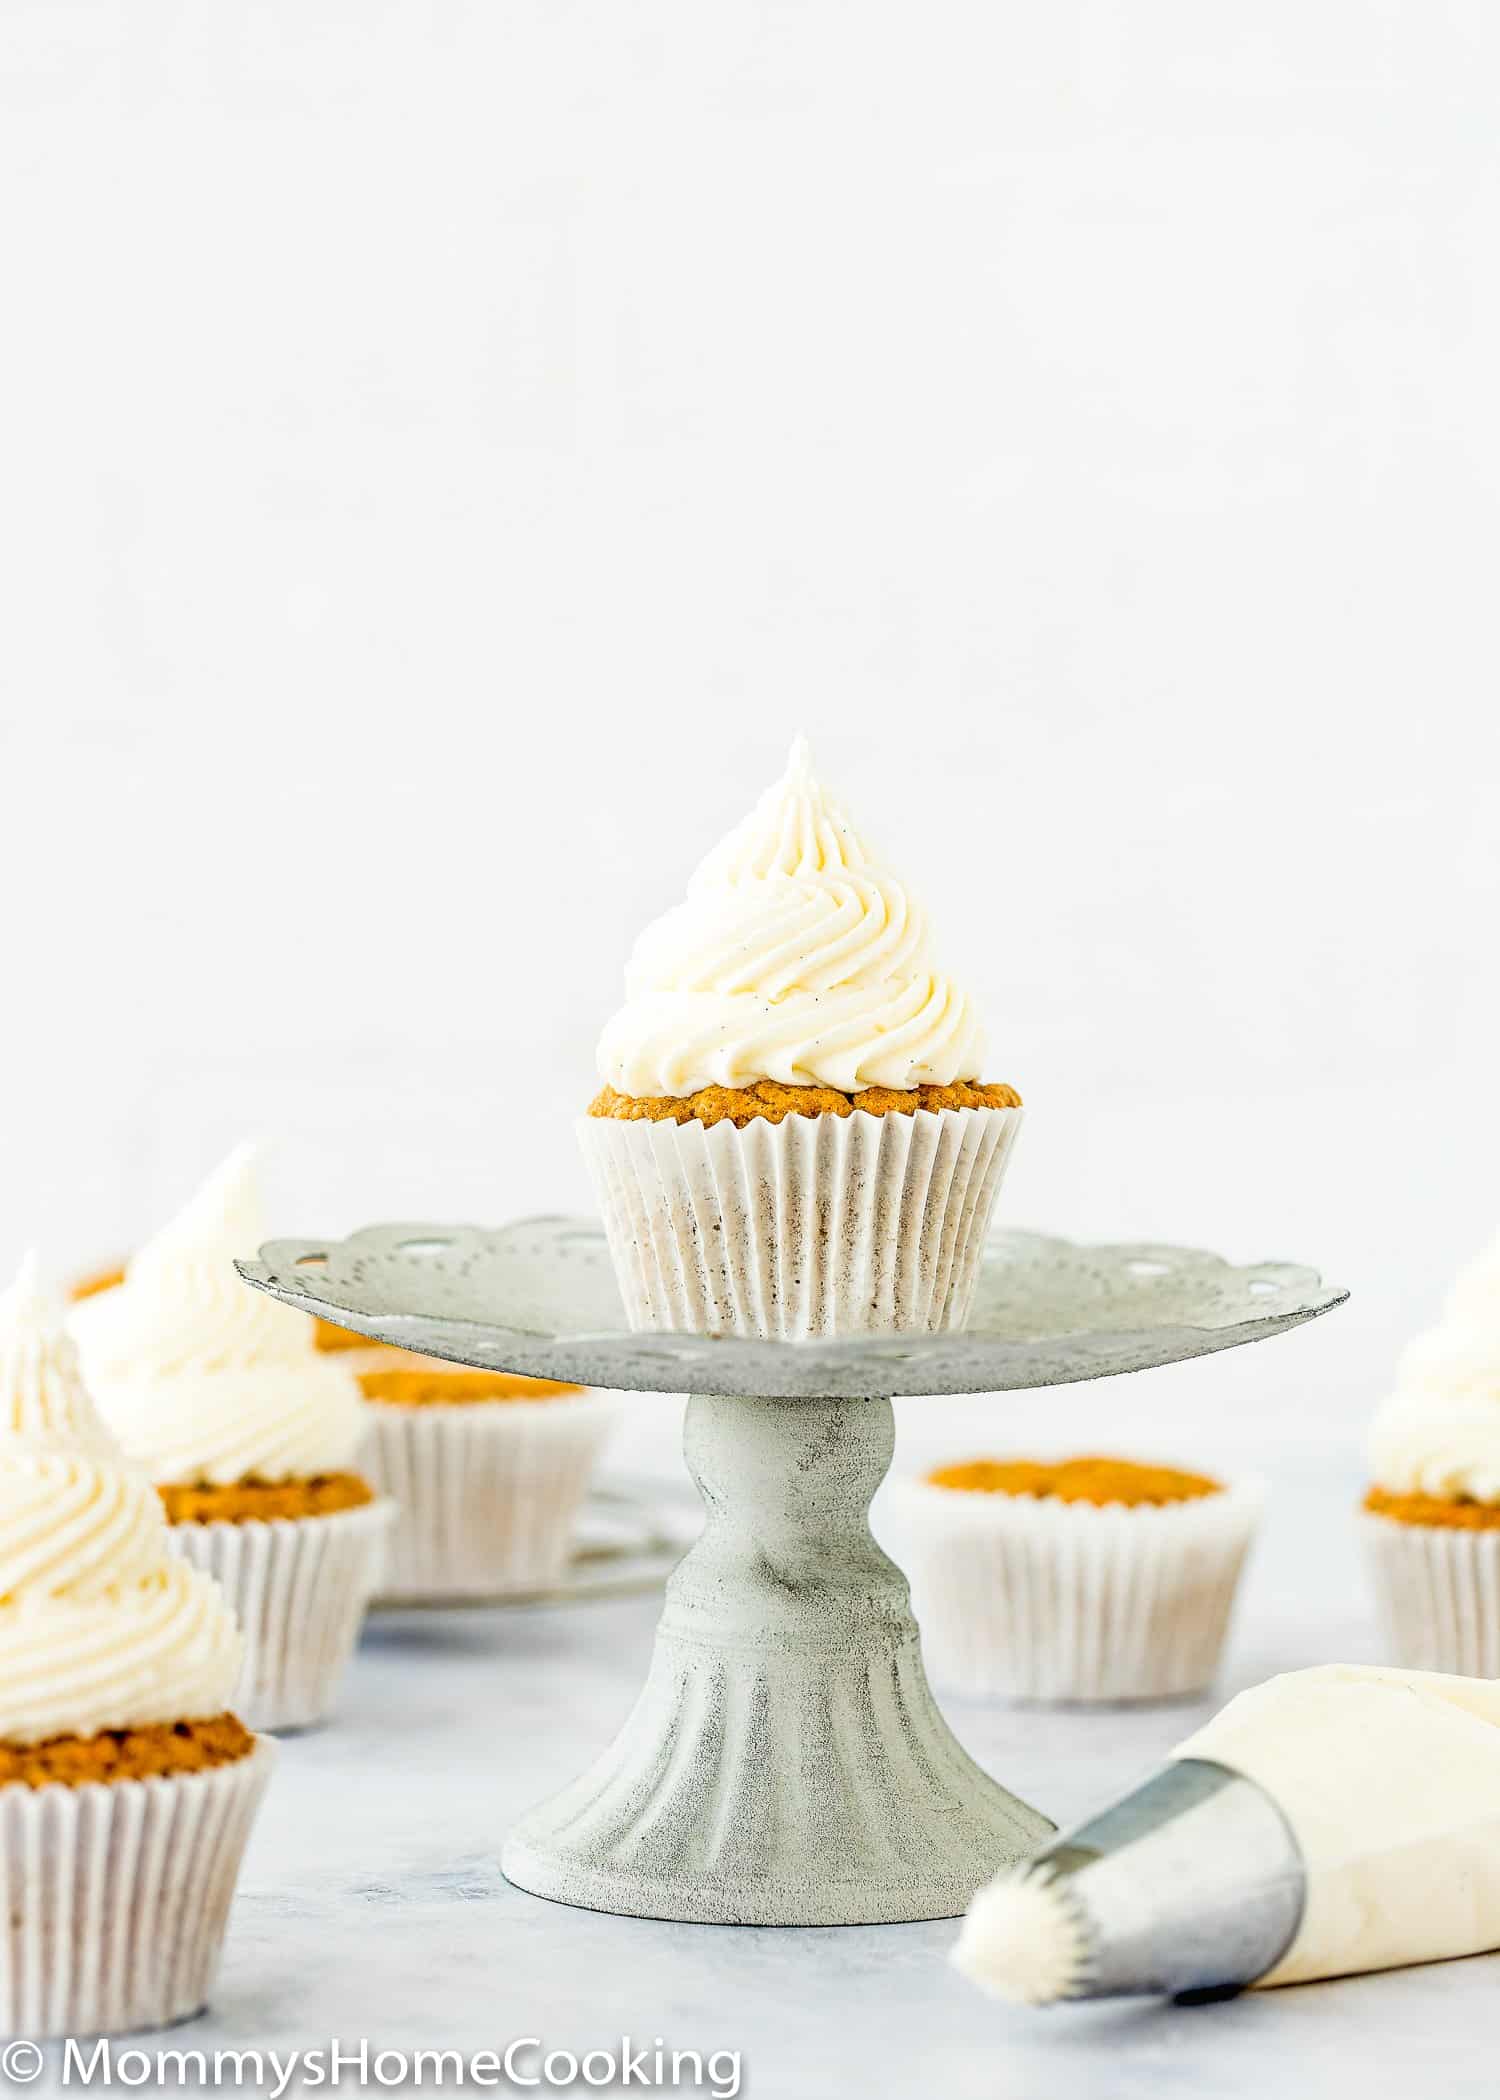 cupcakes frosted with stiff cream cheese frosting buttercream